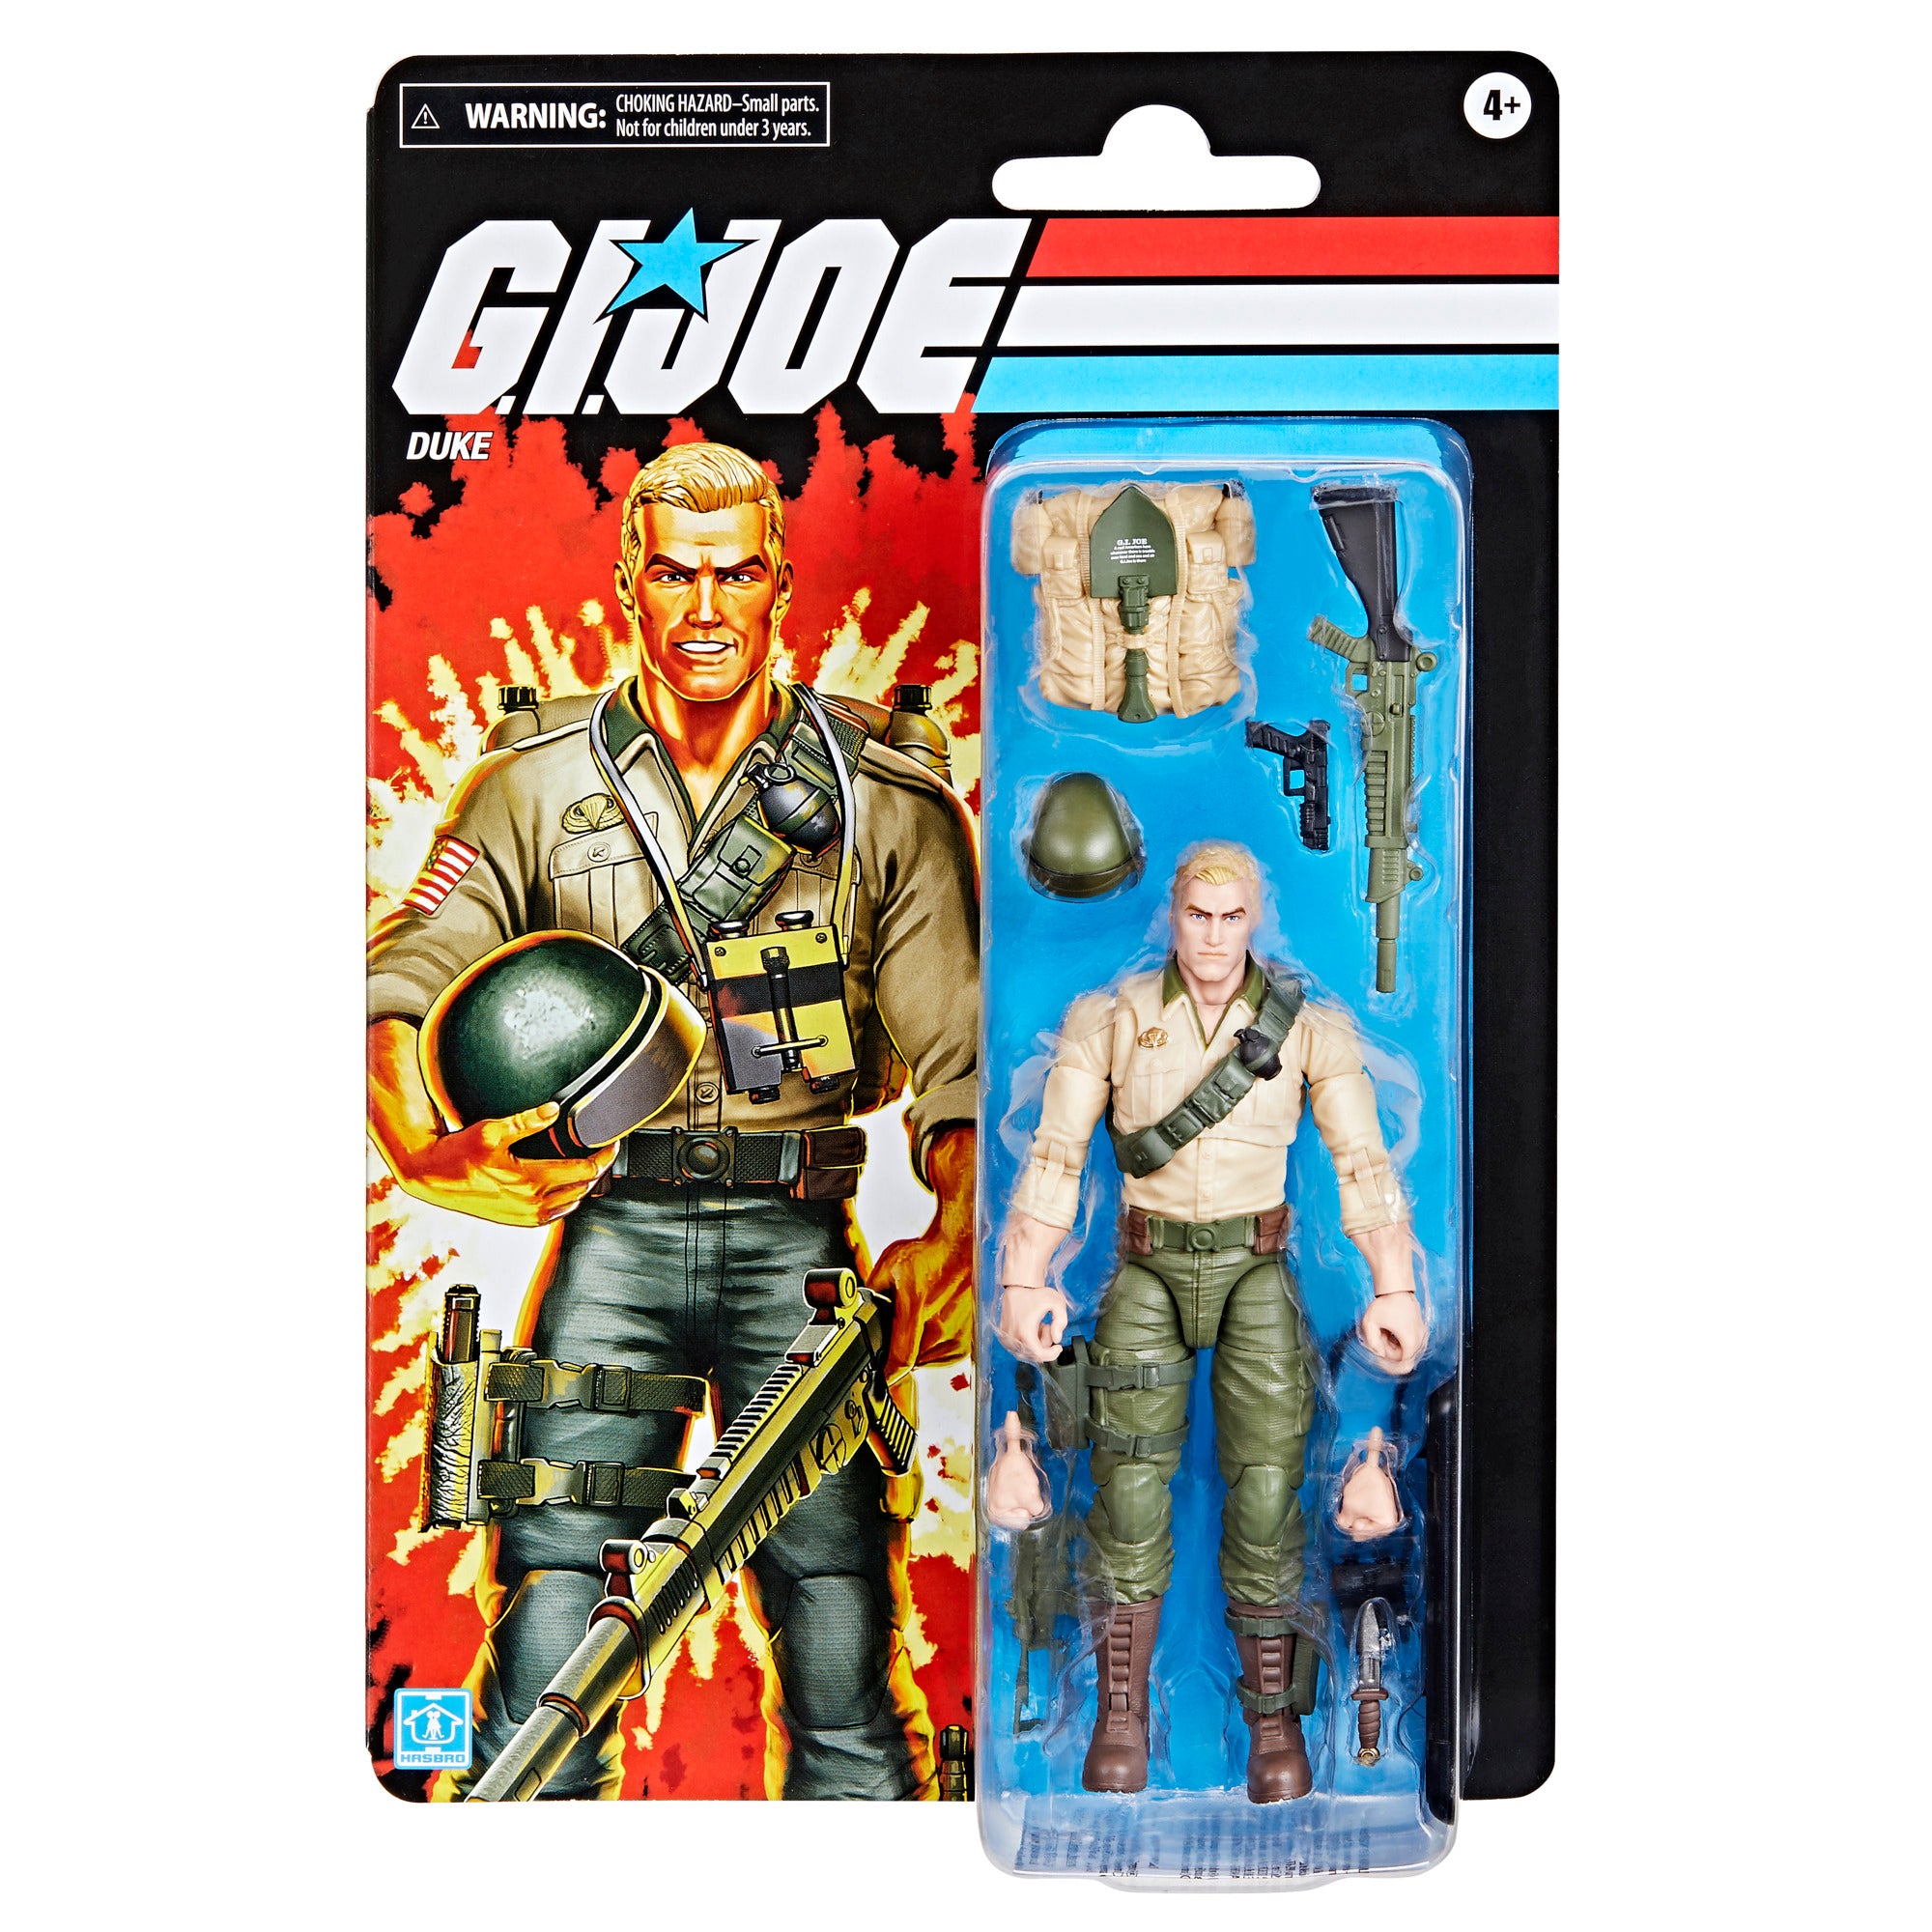 G.I. Joe Classified Series Storm Shadow Action Figure with Multiple  Accessories, Classic Package Art 